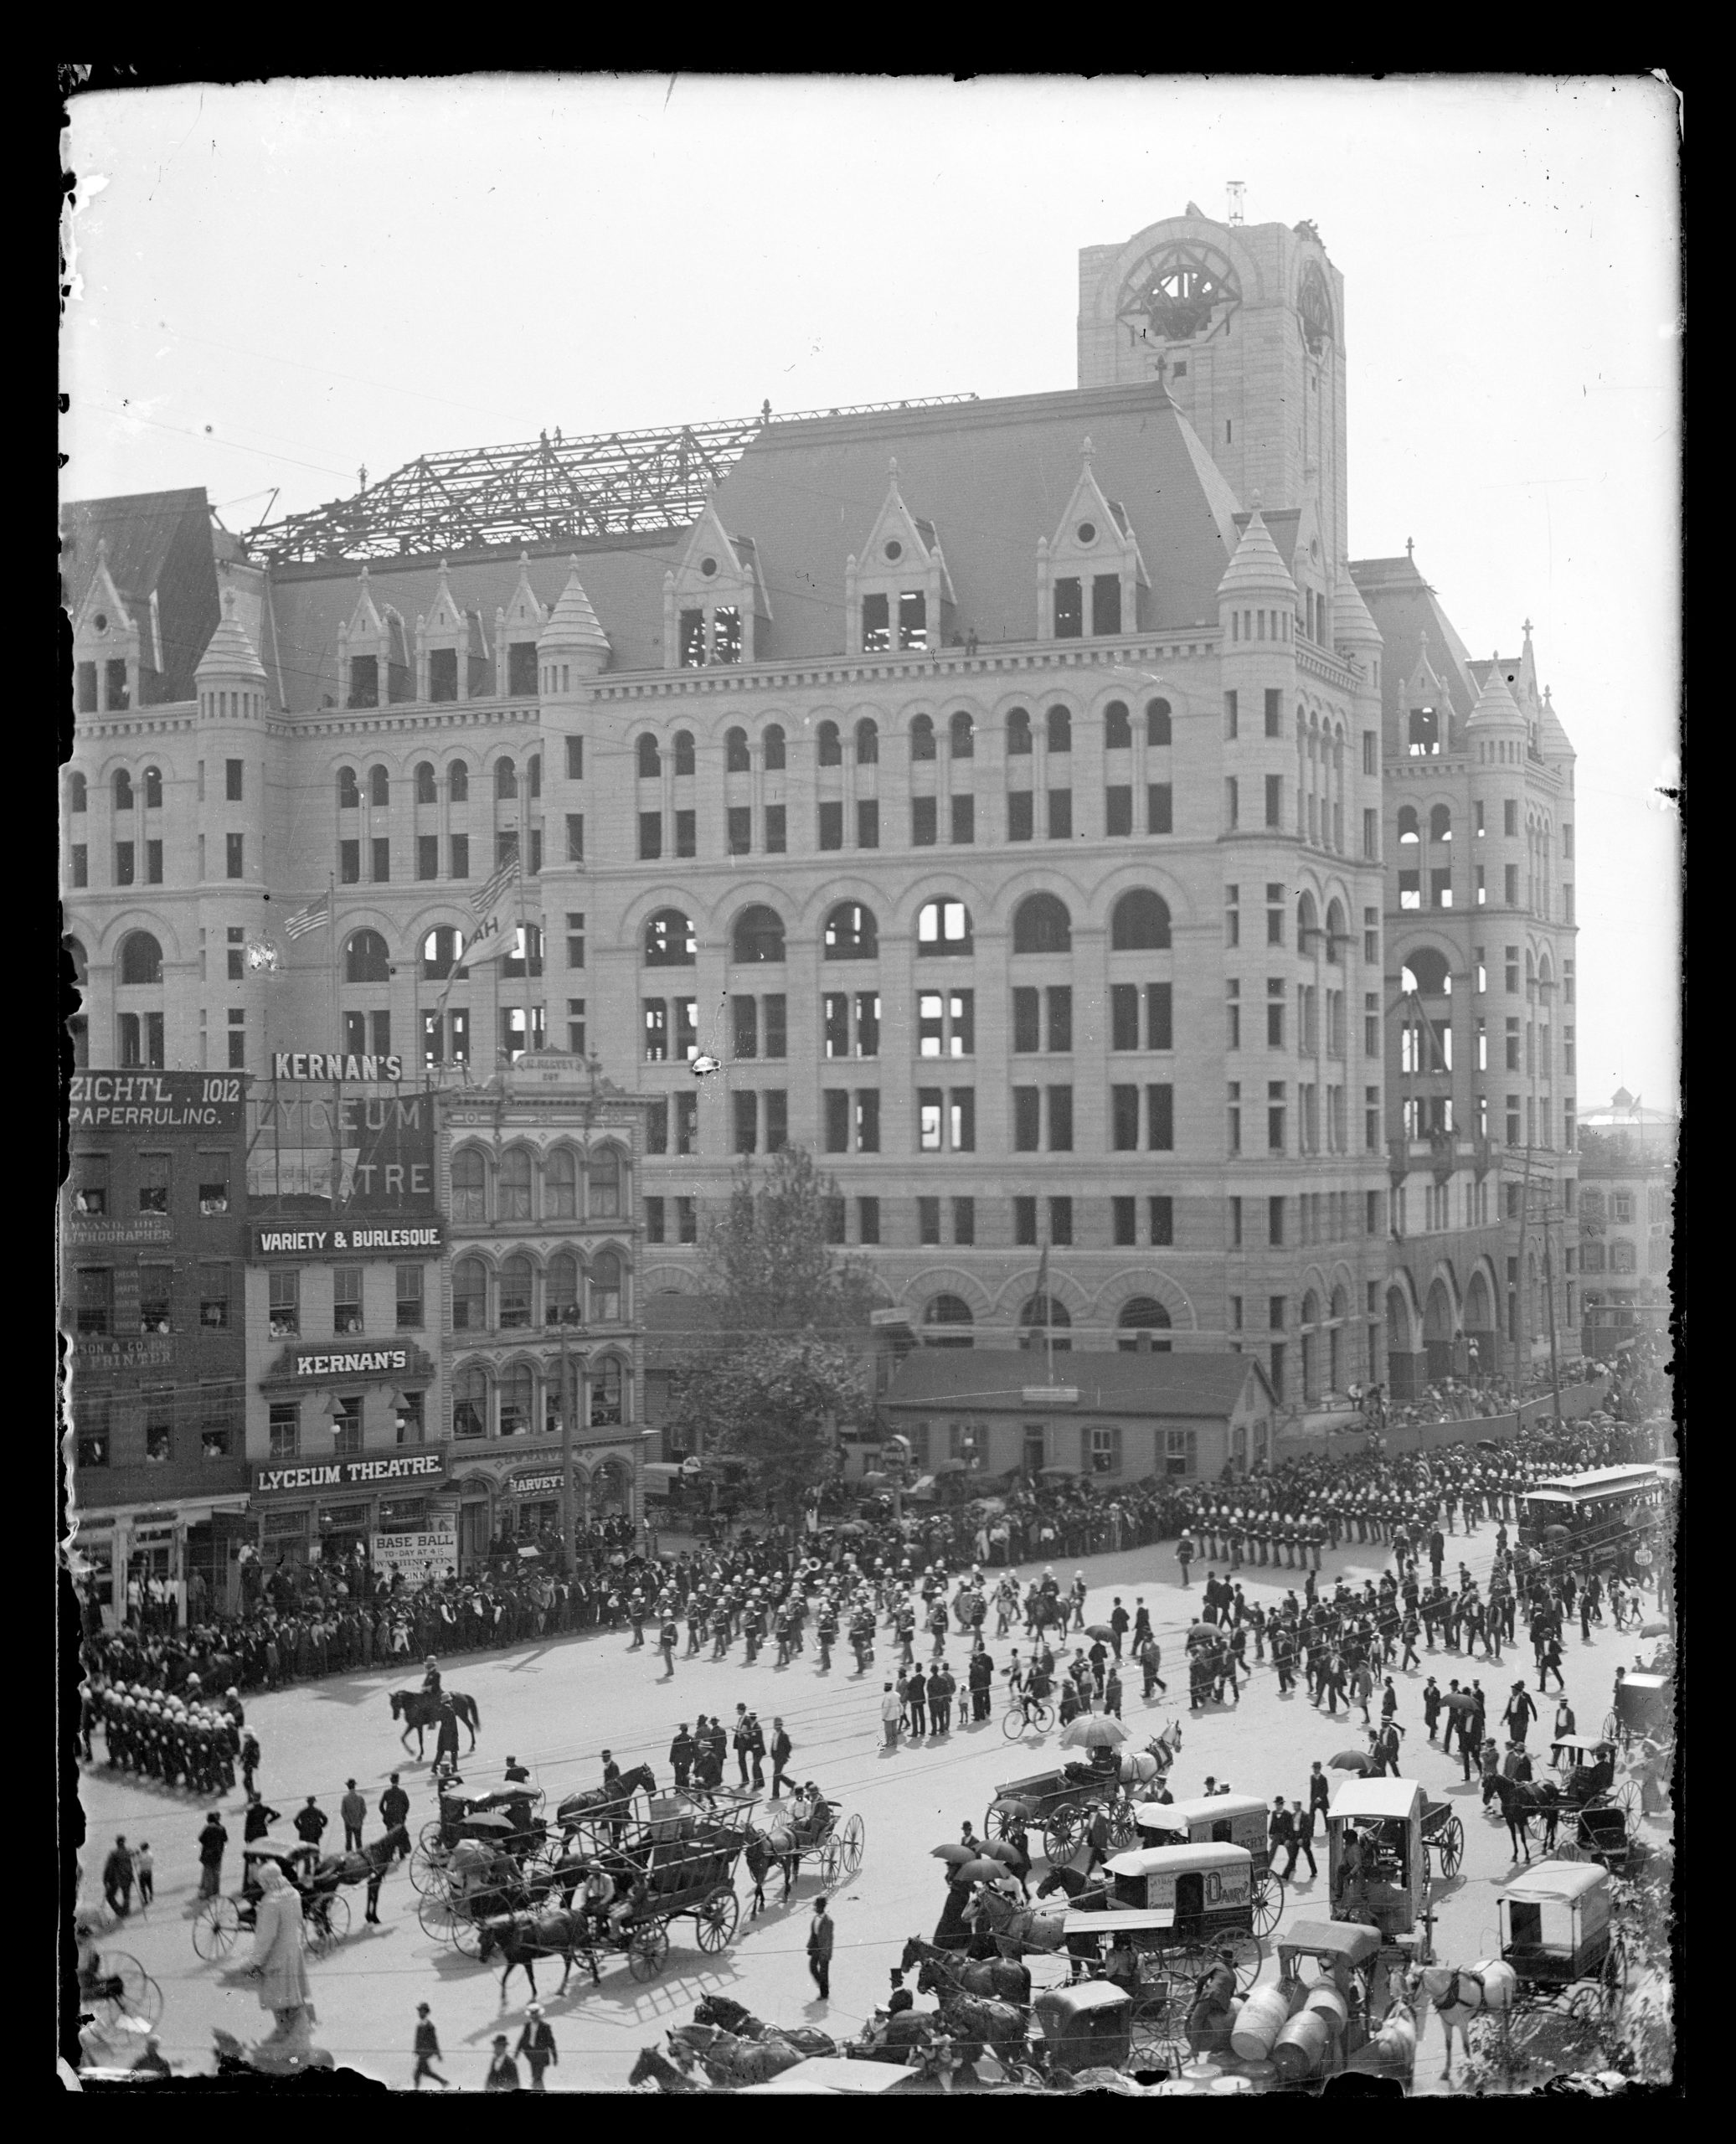 Labor Day parade on Pennsylvania Avenue in the vicinity of Kernan's Lyceum Theater and unfinished Post Office building in Washington D.C., 1894. Library of Congress